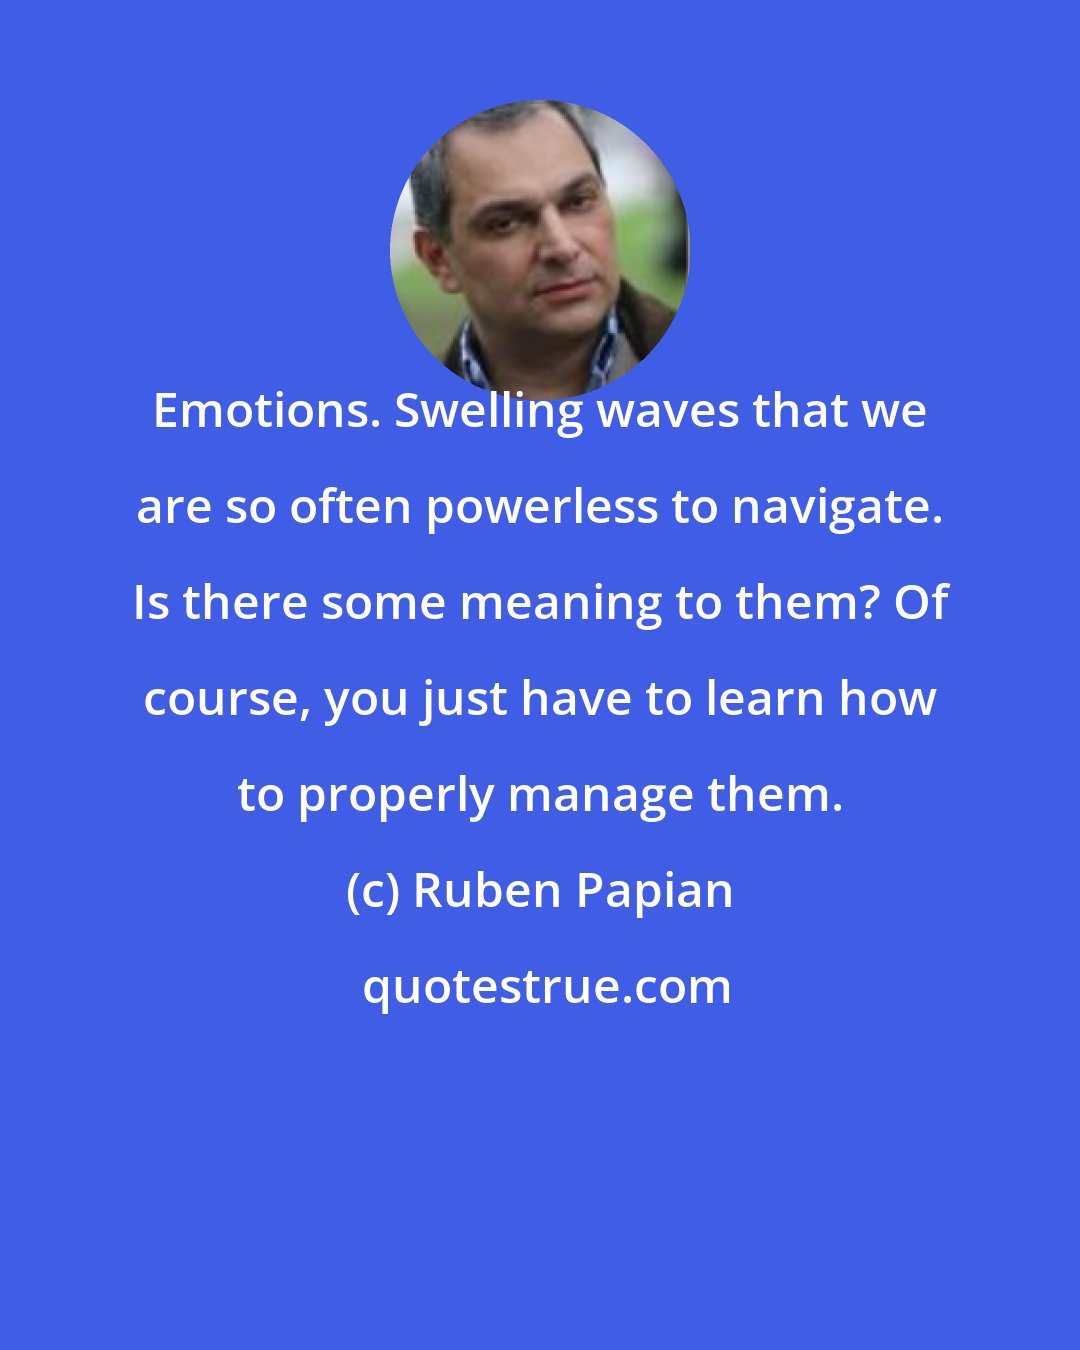 Ruben Papian: Emotions. Swelling waves that we are so often powerless to navigate. Is there some meaning to them? Of course, you just have to learn how to properly manage them.